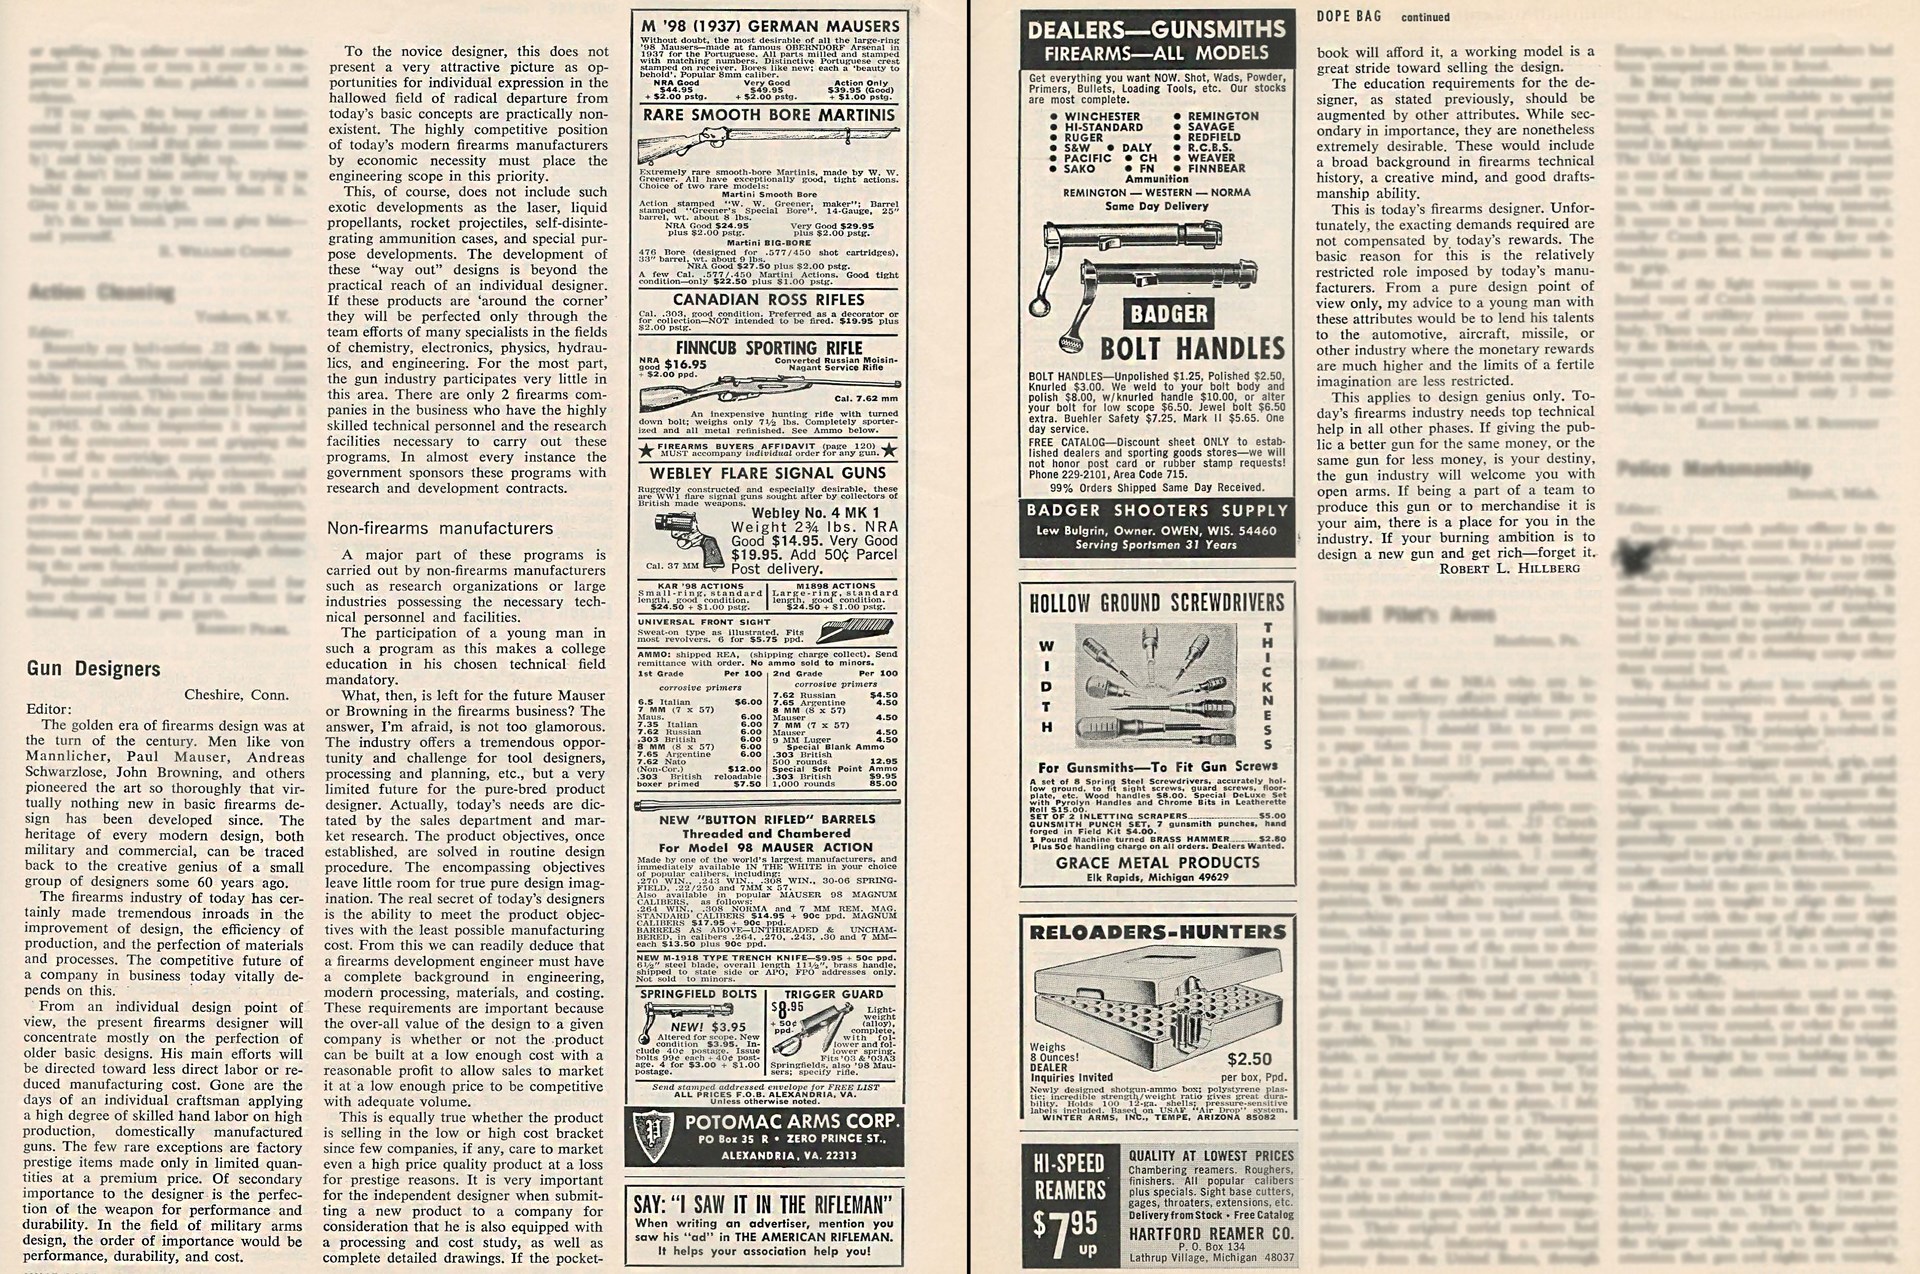 June 1966 The American Rifleman magazine pages text throughout ads Hillberg column letter to the editor